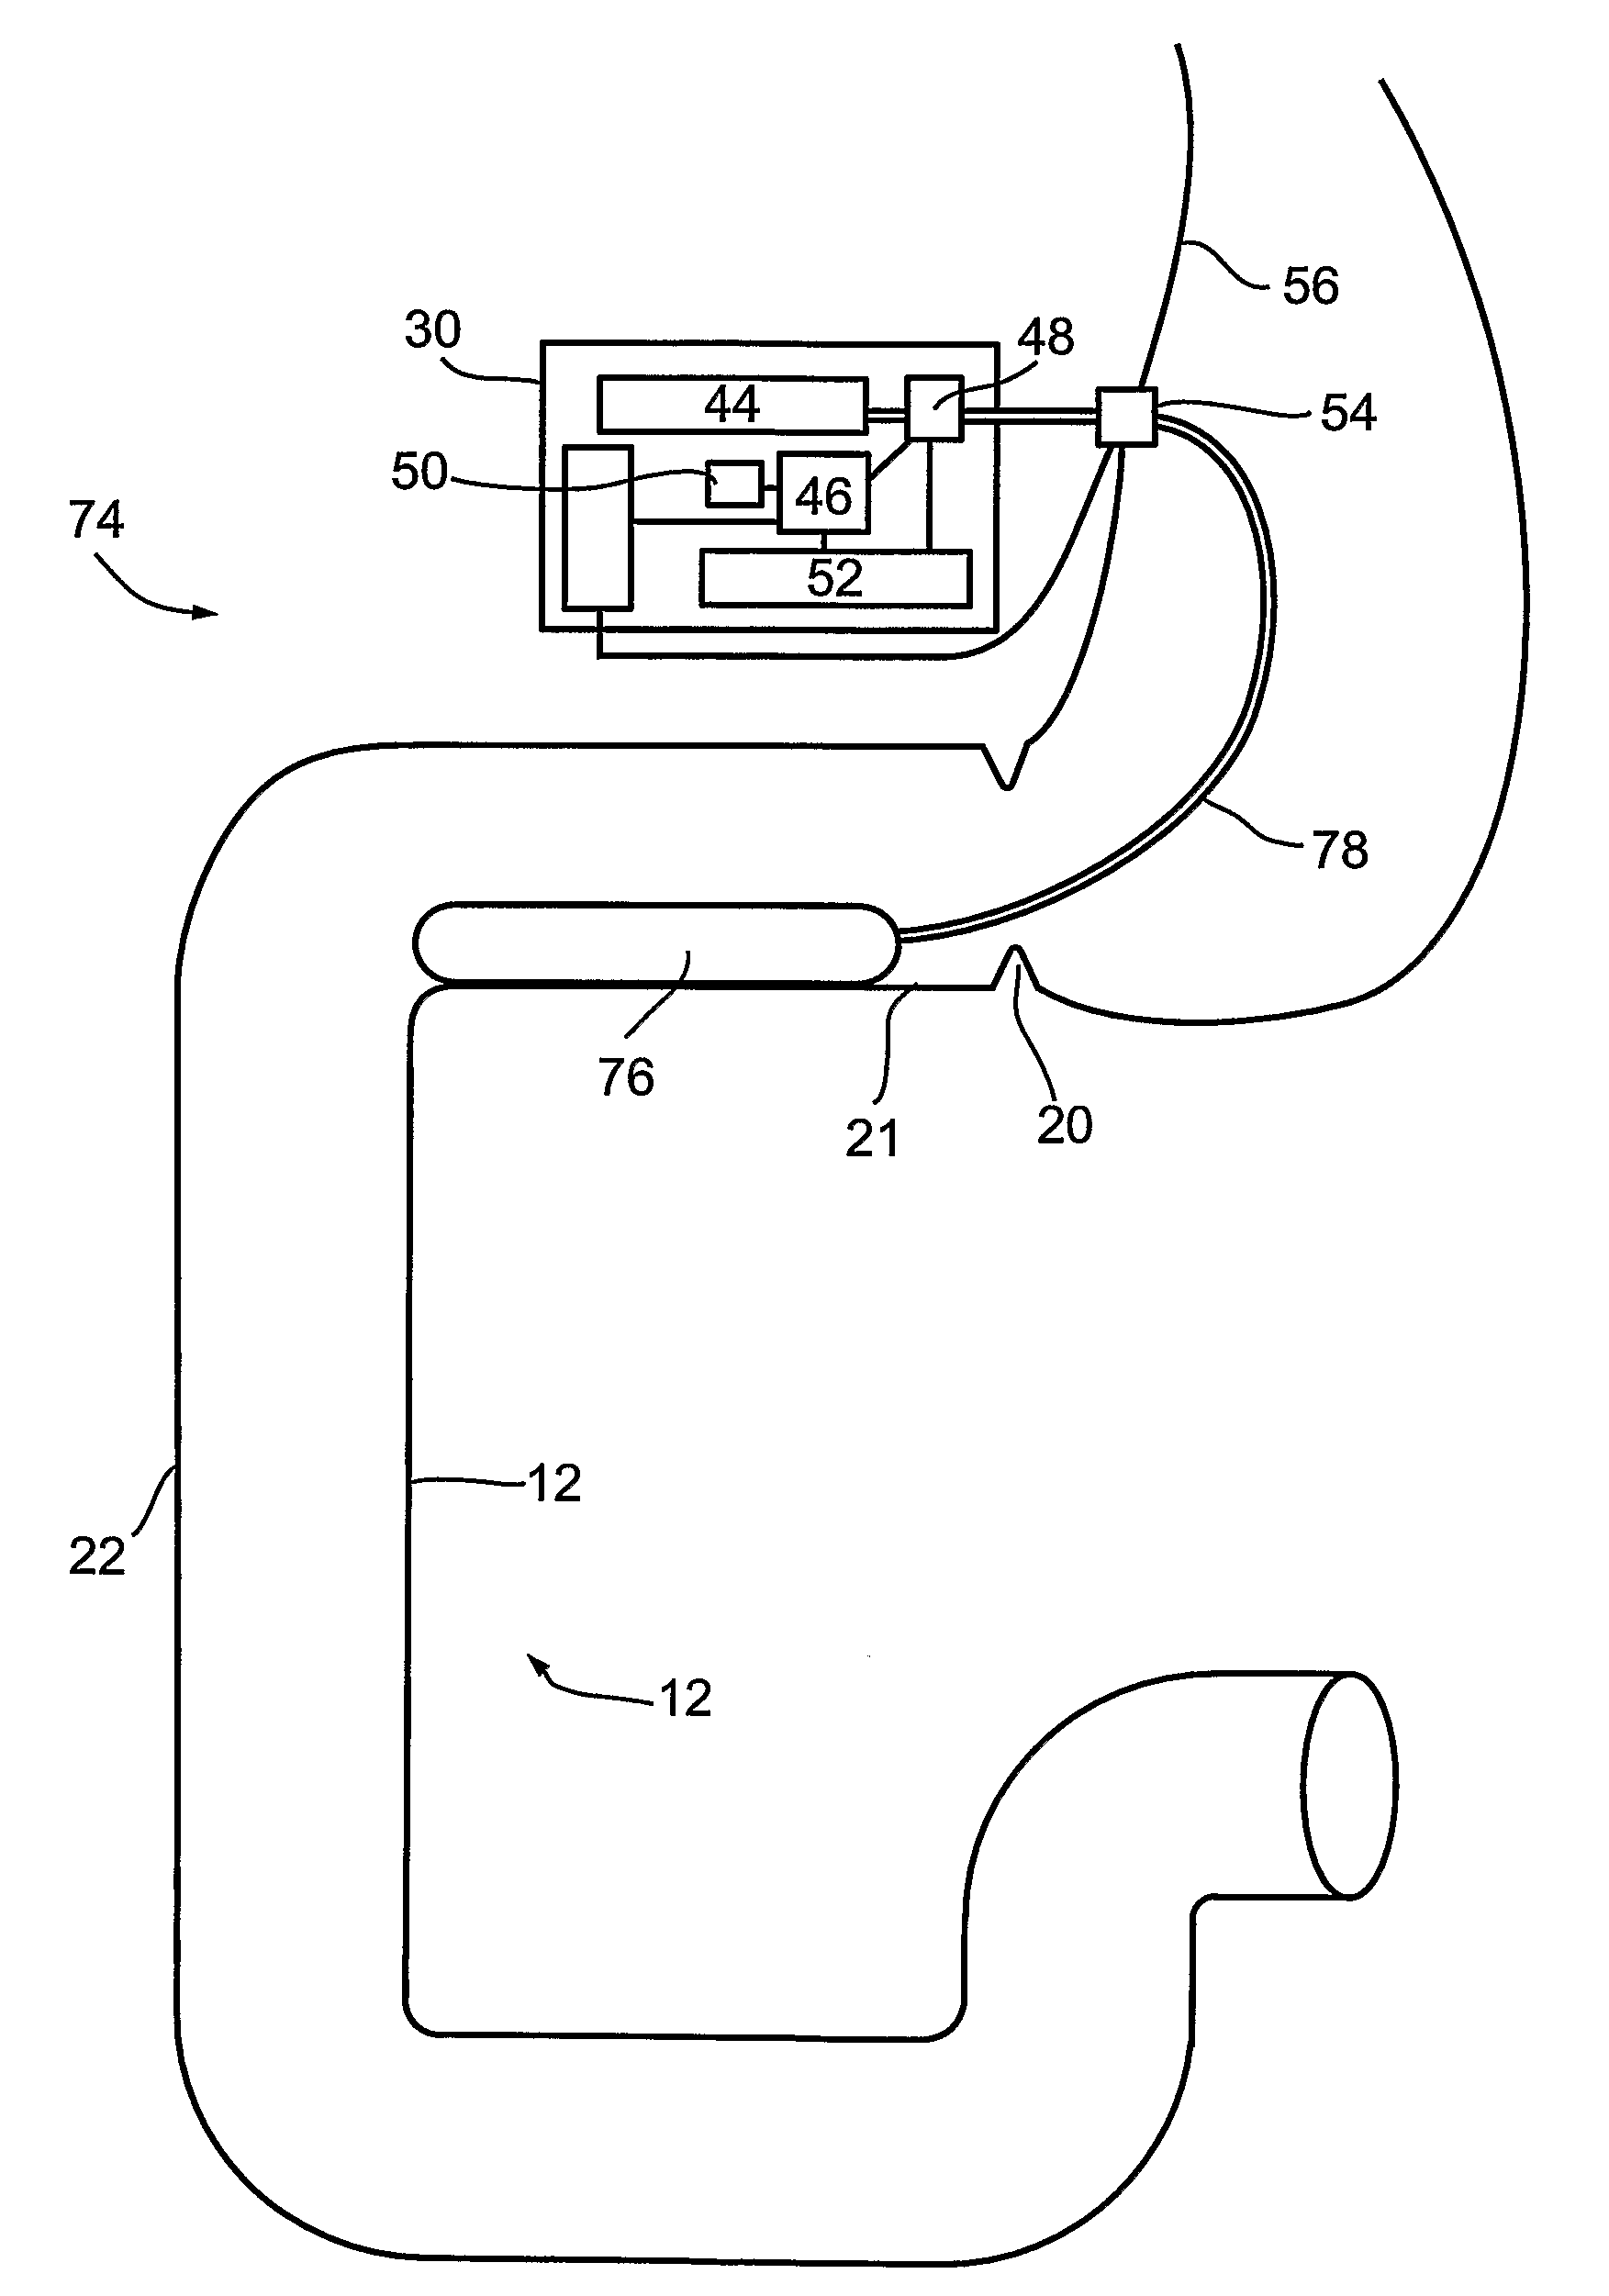 Duodenal stimulation devices and methods for the treatment of conditions relating to eating disorders